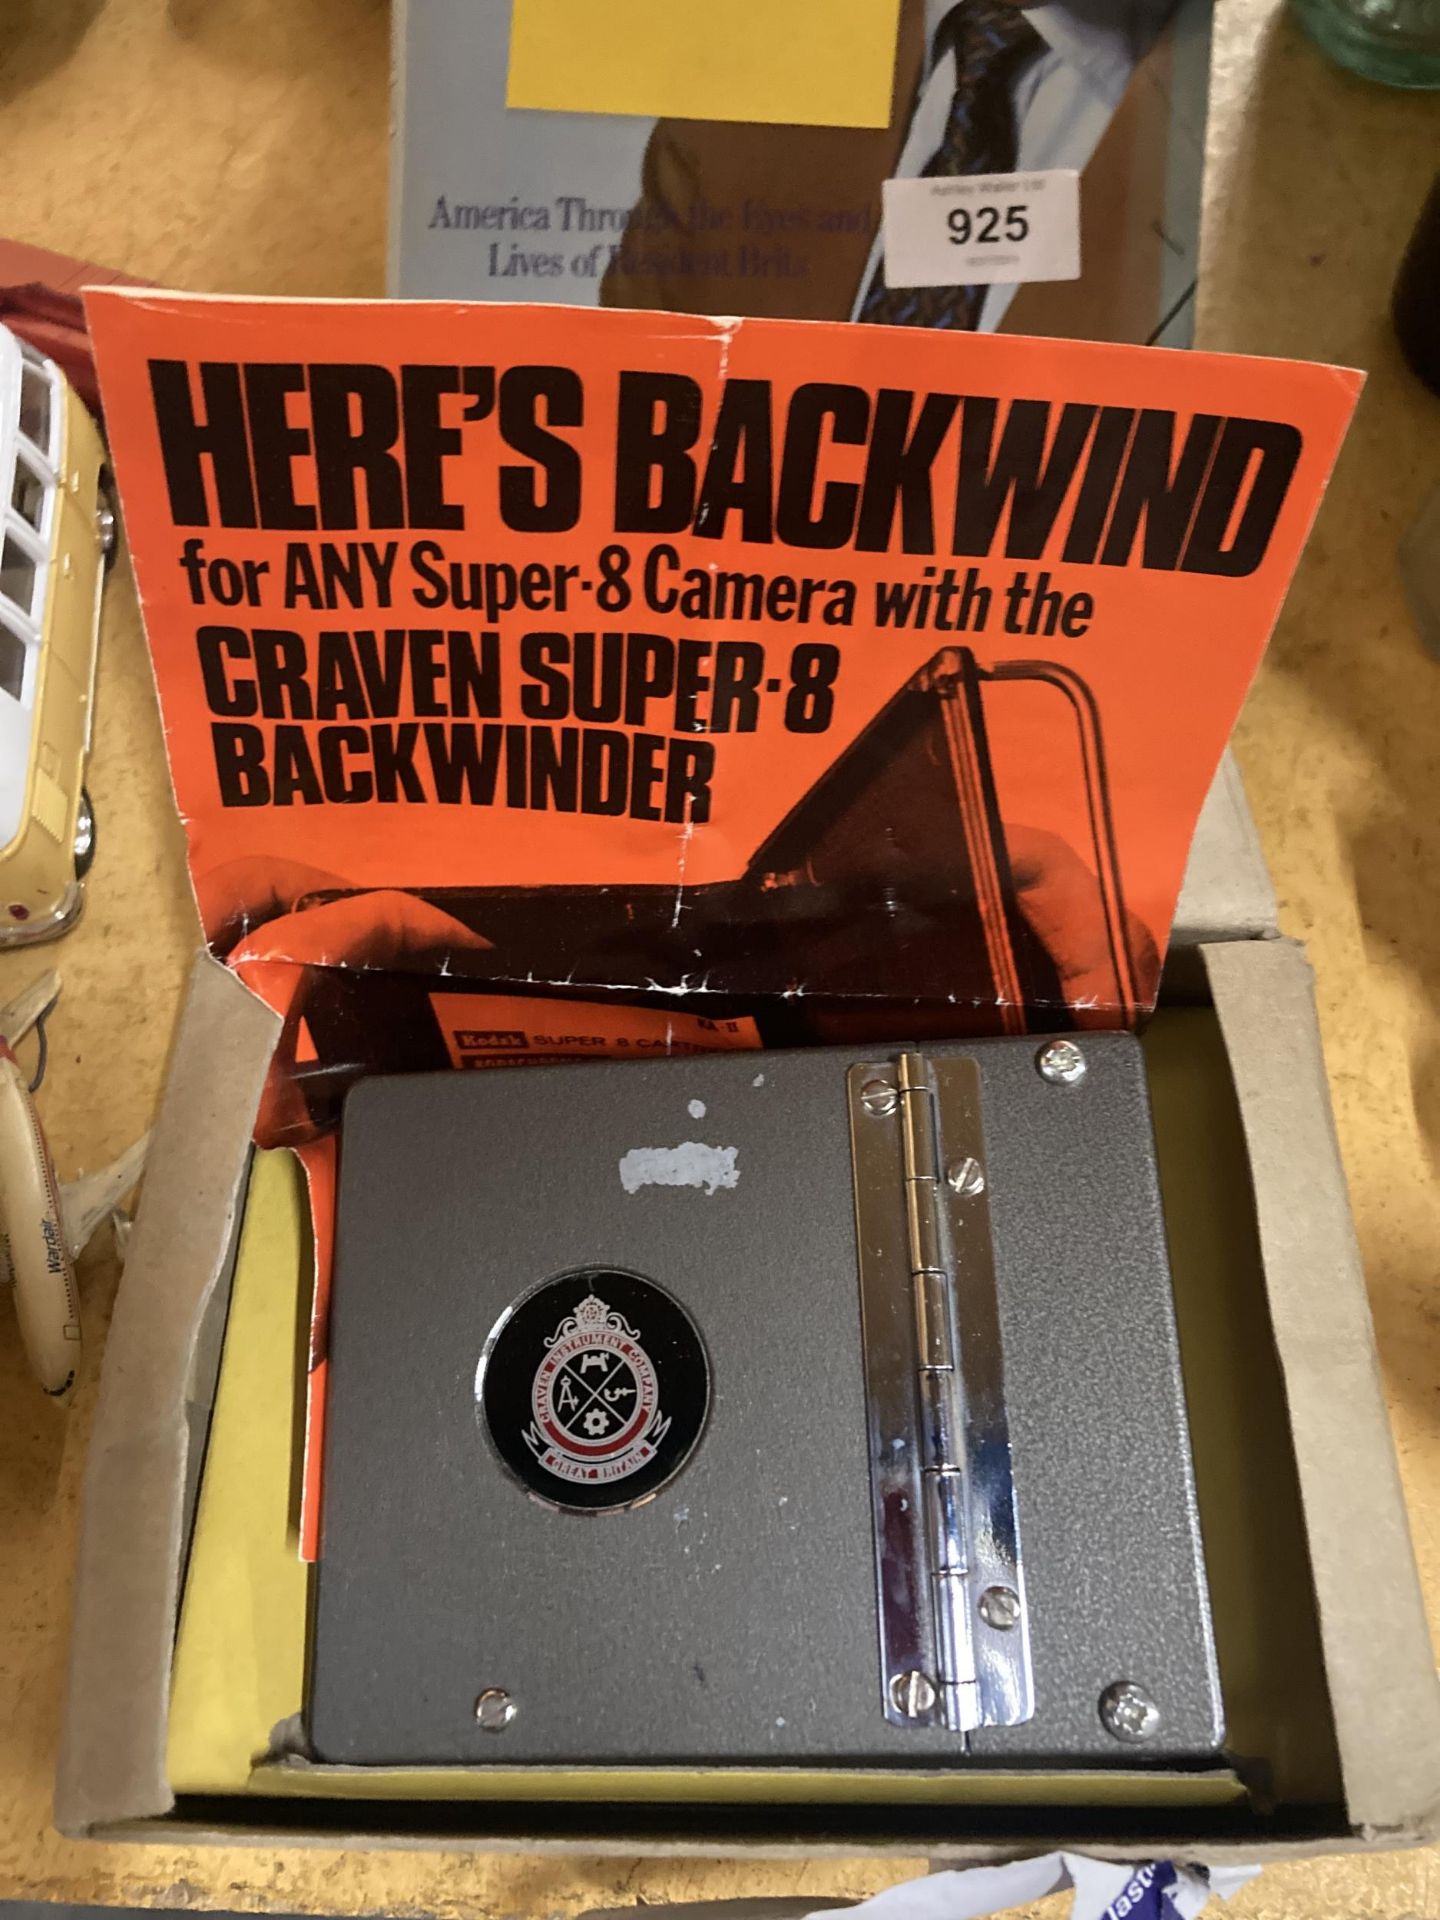 A CRAVEN SUPER 8 BACKWINDER WITH INSTRUCTIONS